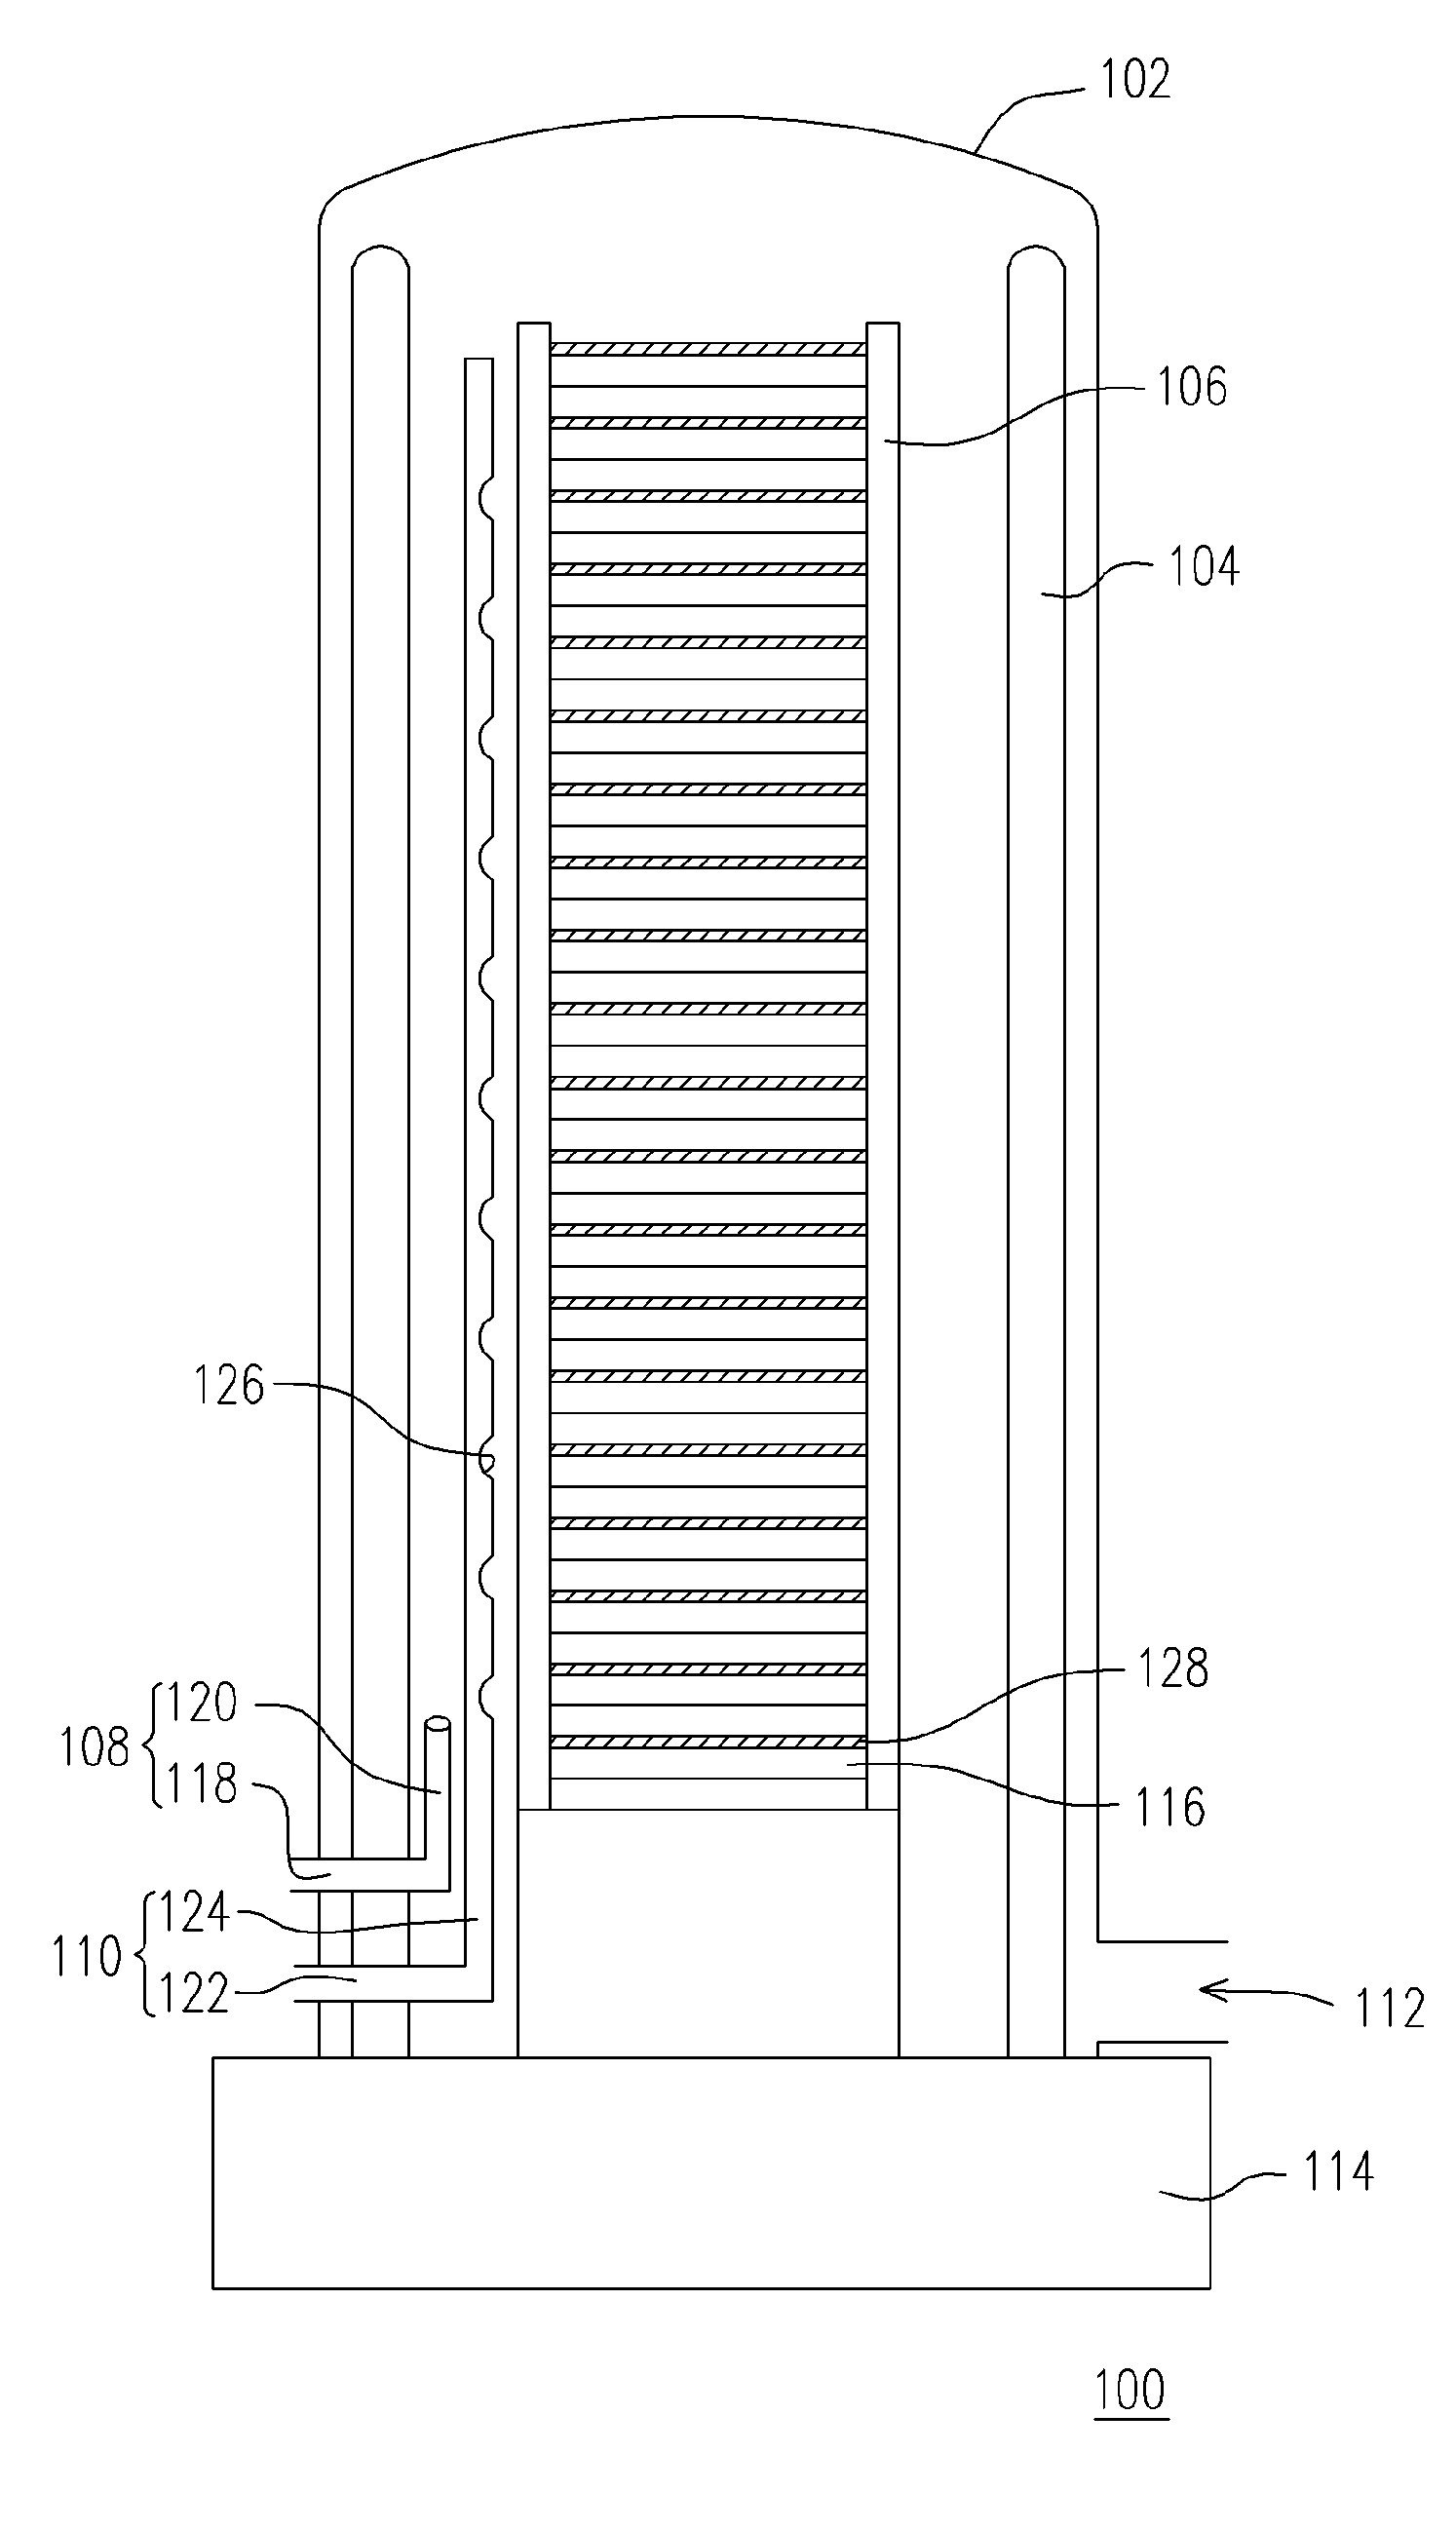 Method of forming a silicon nitride layer